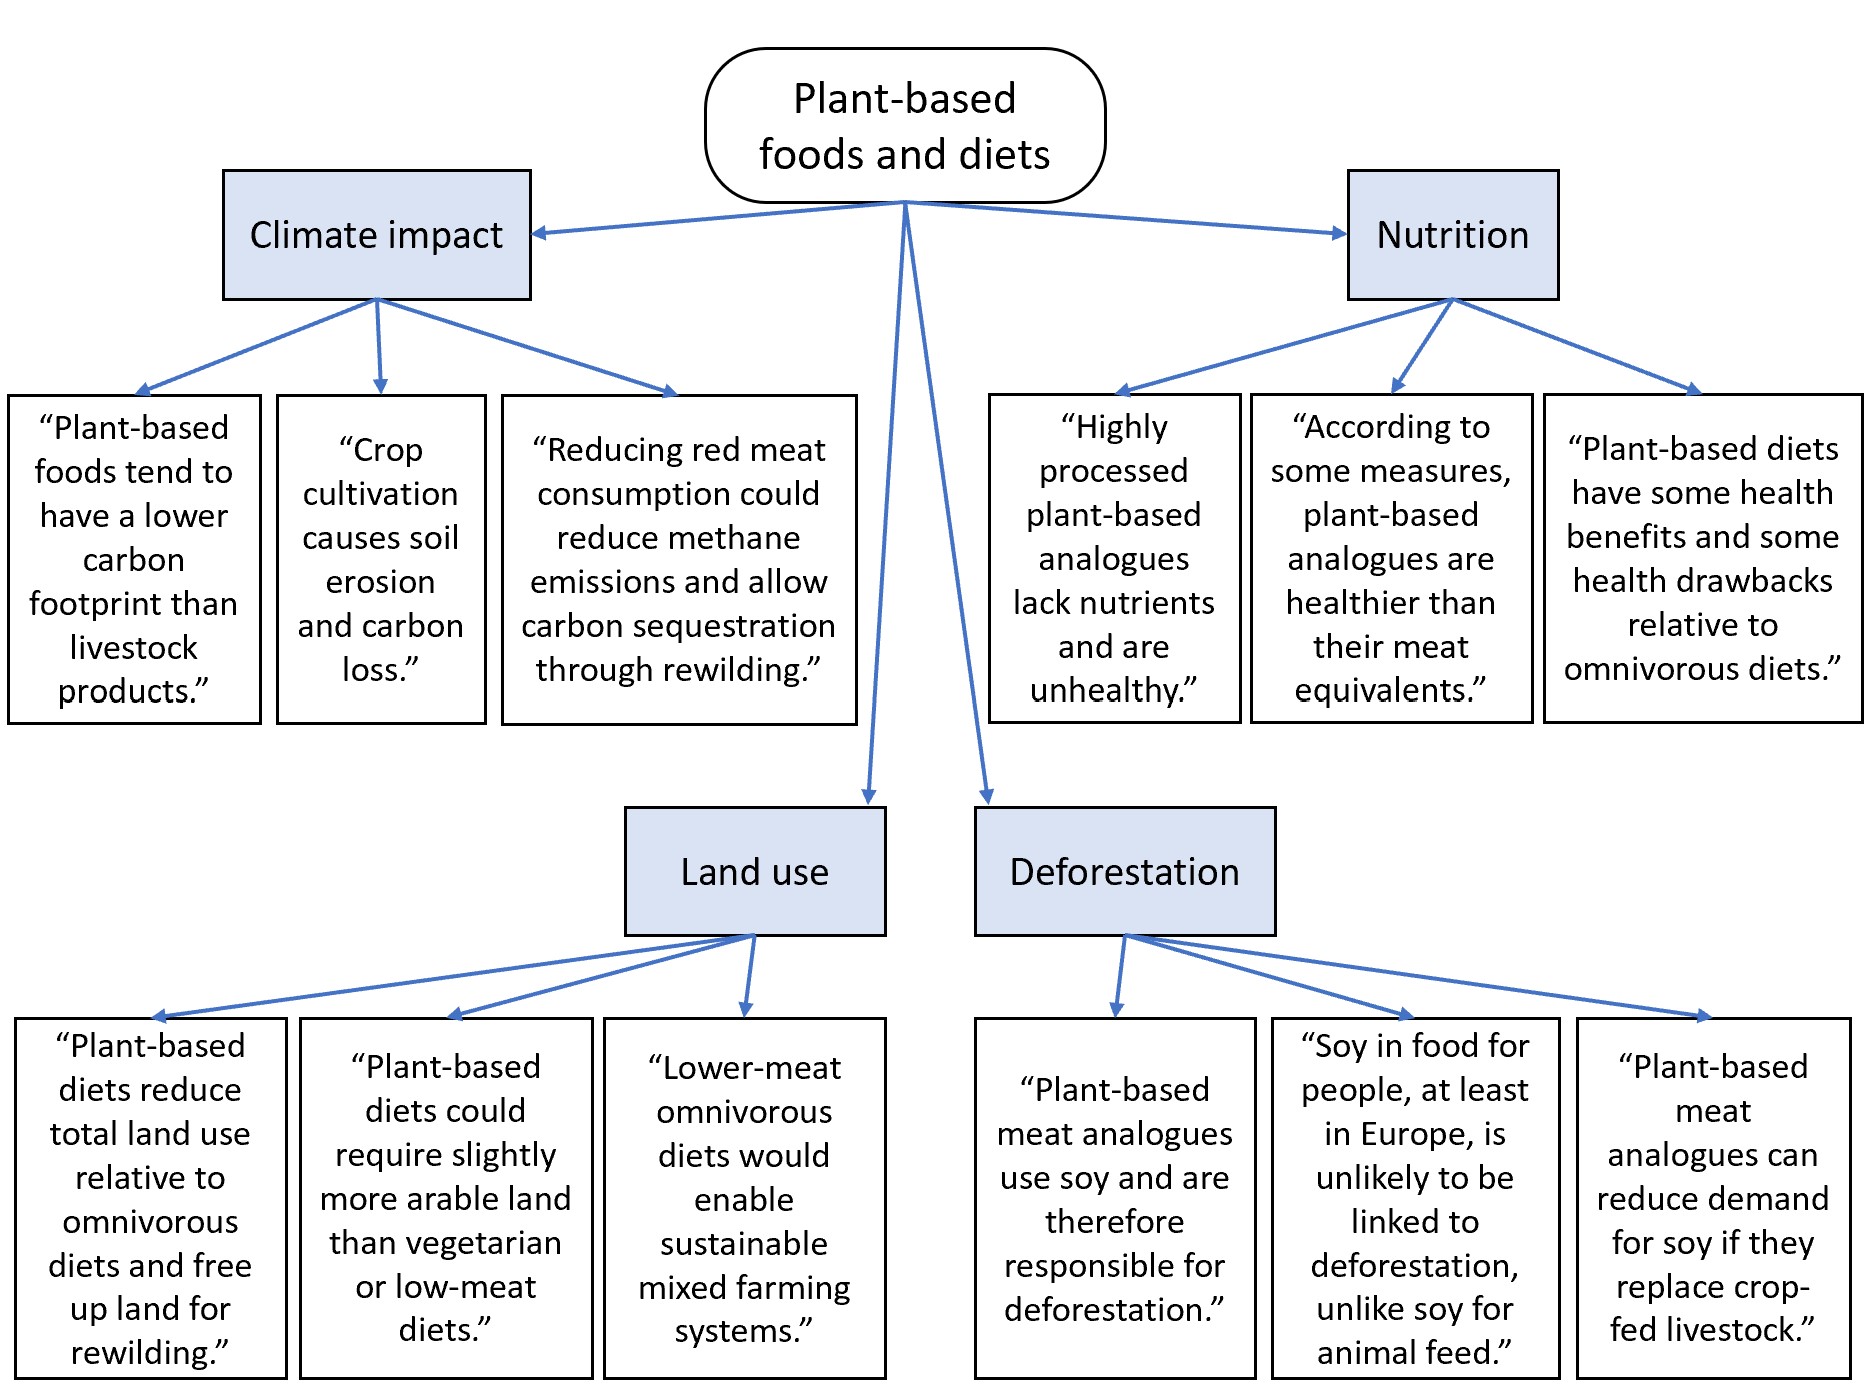 Figure 5: Differing interpretations of sustainability concerns relating to plant-based foods and diets. Each statement represents a different subjective viewpoint. Graphic produced by TABLE.